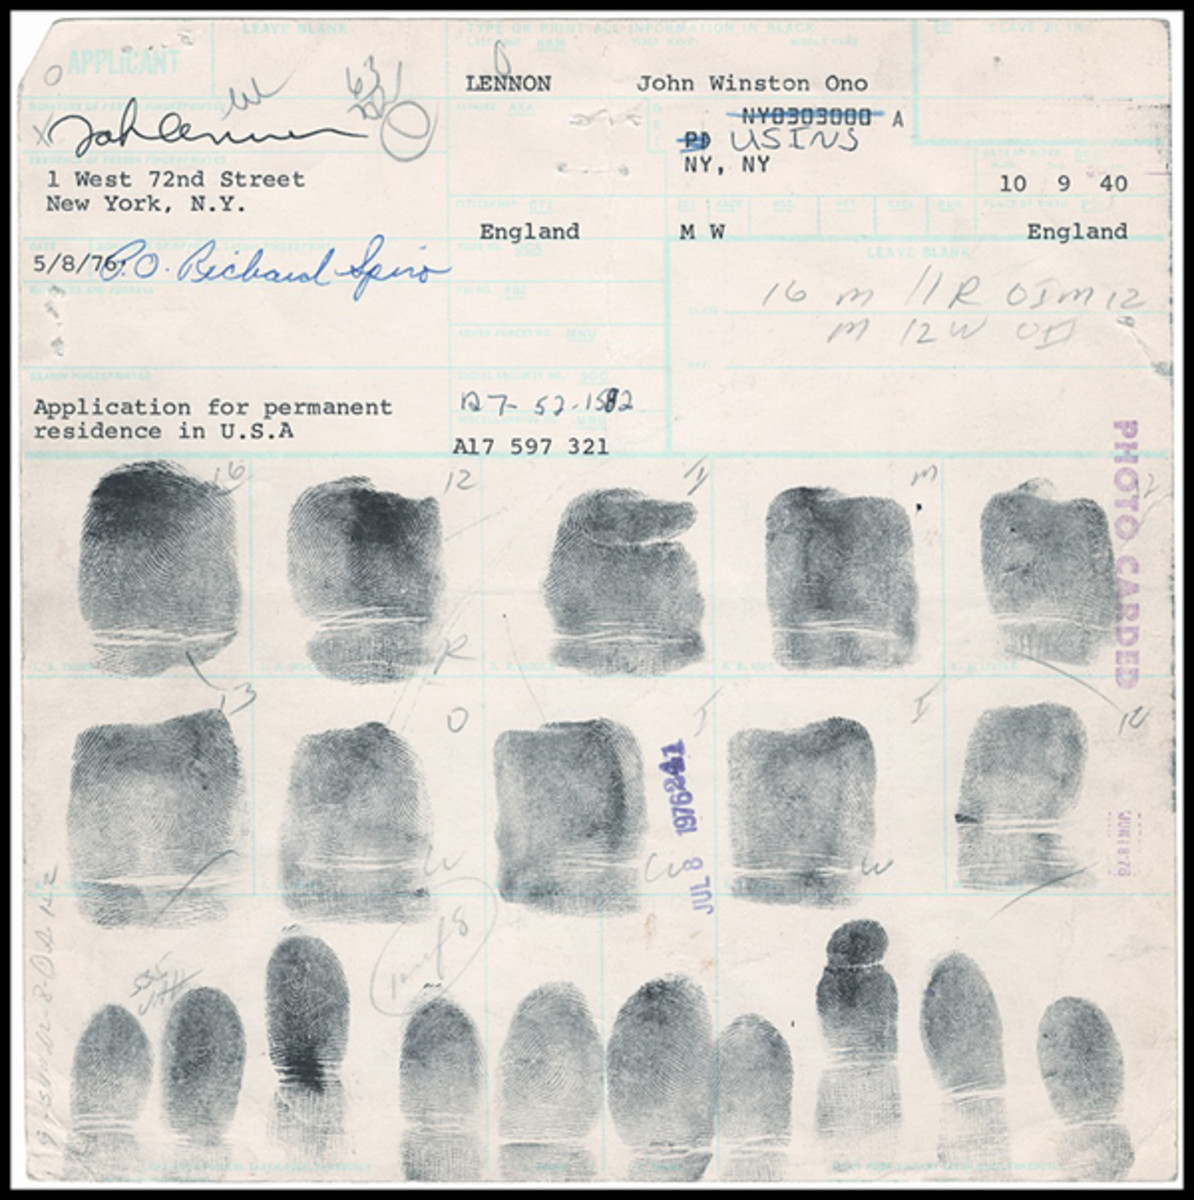 The FBI seized this John Lennon fingerprint card from Gotta Have It!, which had the piece for sale in its Rock & Roll Pop Culture Auction. Photo courtesy of Gotta Have It!